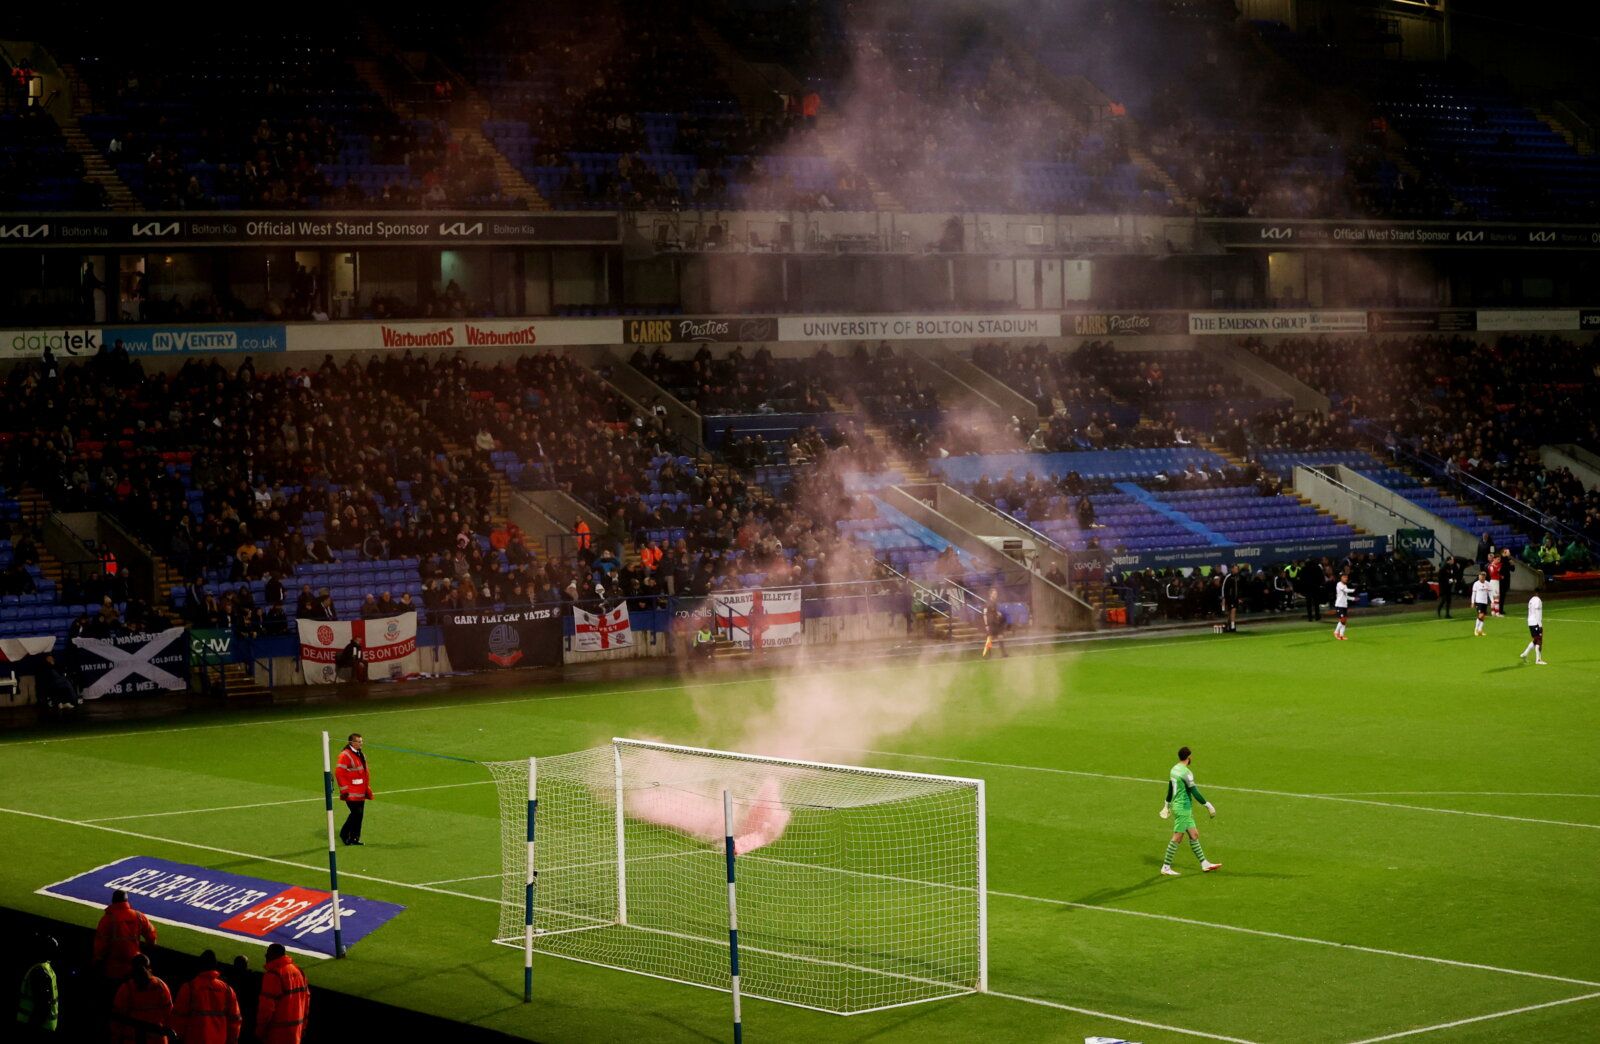 Soccer Football - League One - Bolton Wanderers v Crewe Alexandra - University of Bolton Stadium, Bolton, Britain - November 12, 2021  The match is stopped after a flare is thrown onto the pitch   Action Images/Molly Darlington  EDITORIAL USE ONLY. No use with unauthorized audio, video, data, fixture lists, club/league logos or 